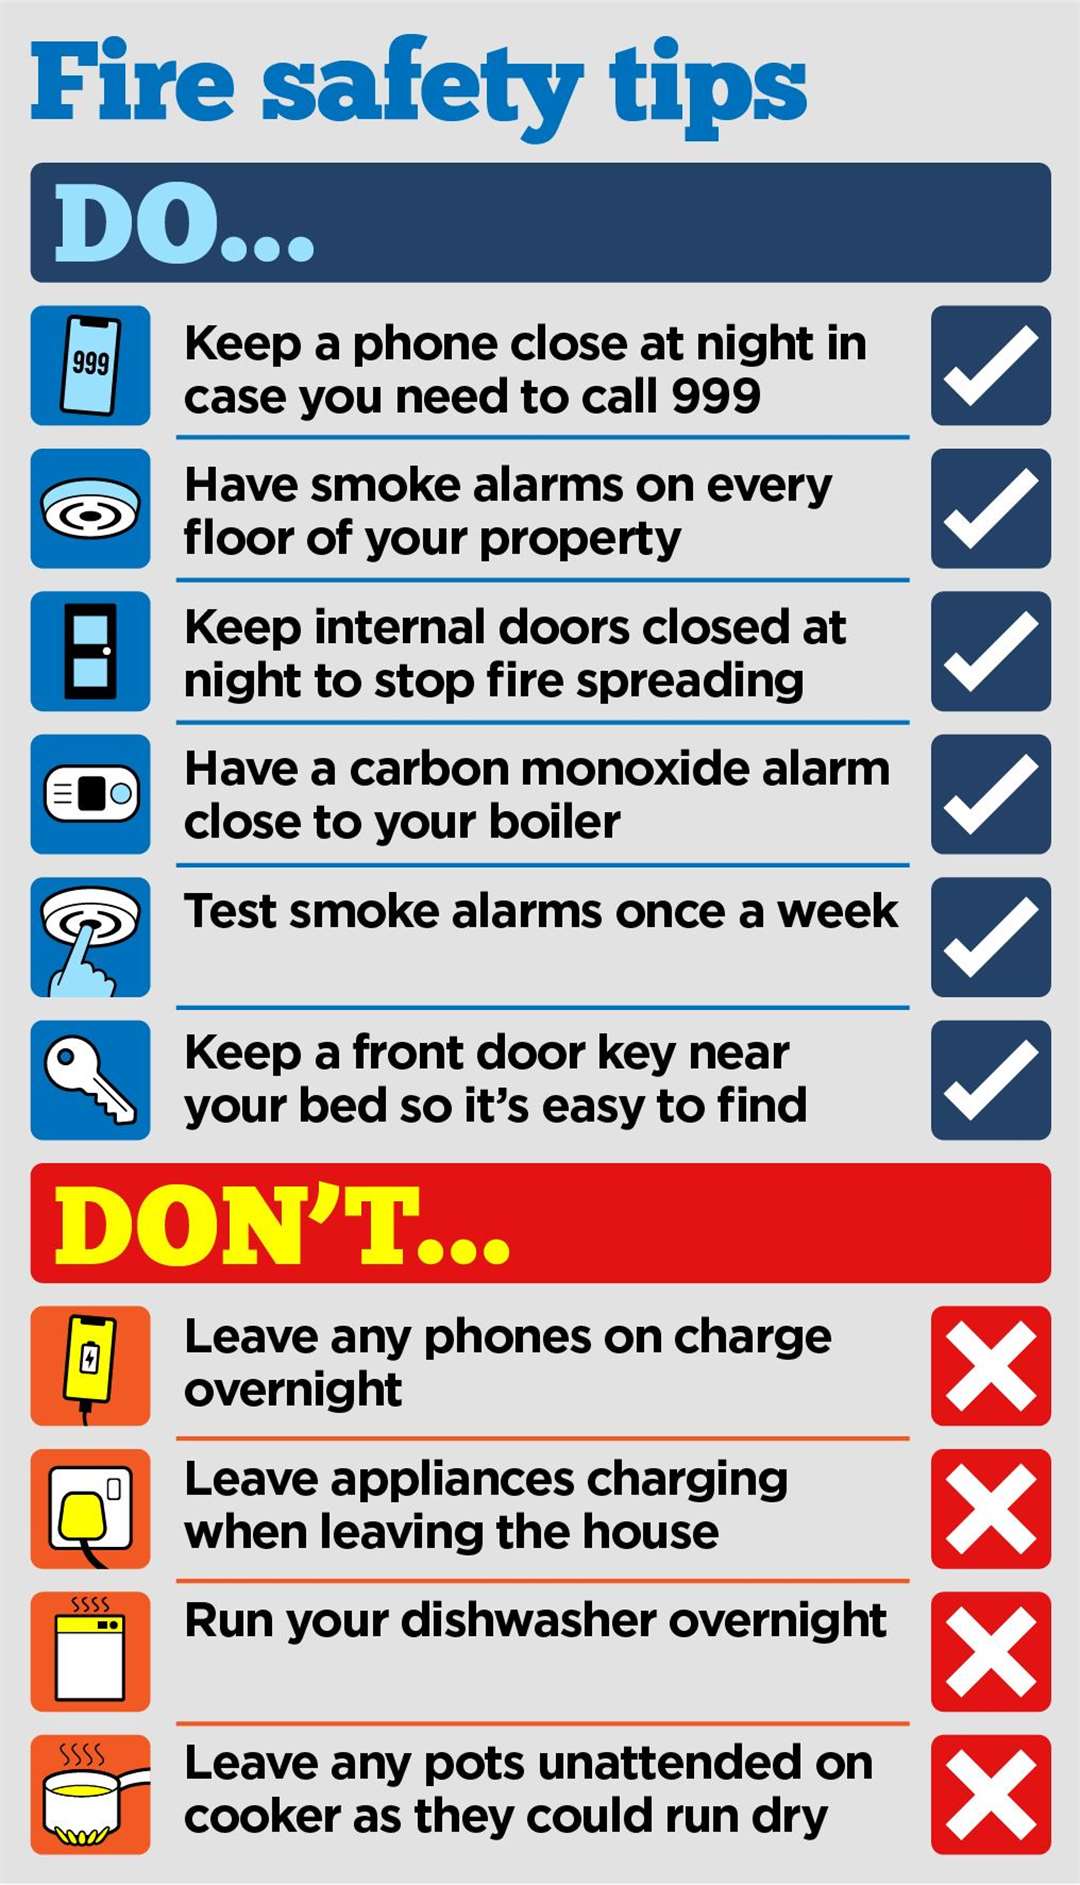 Handy hints from the fire service